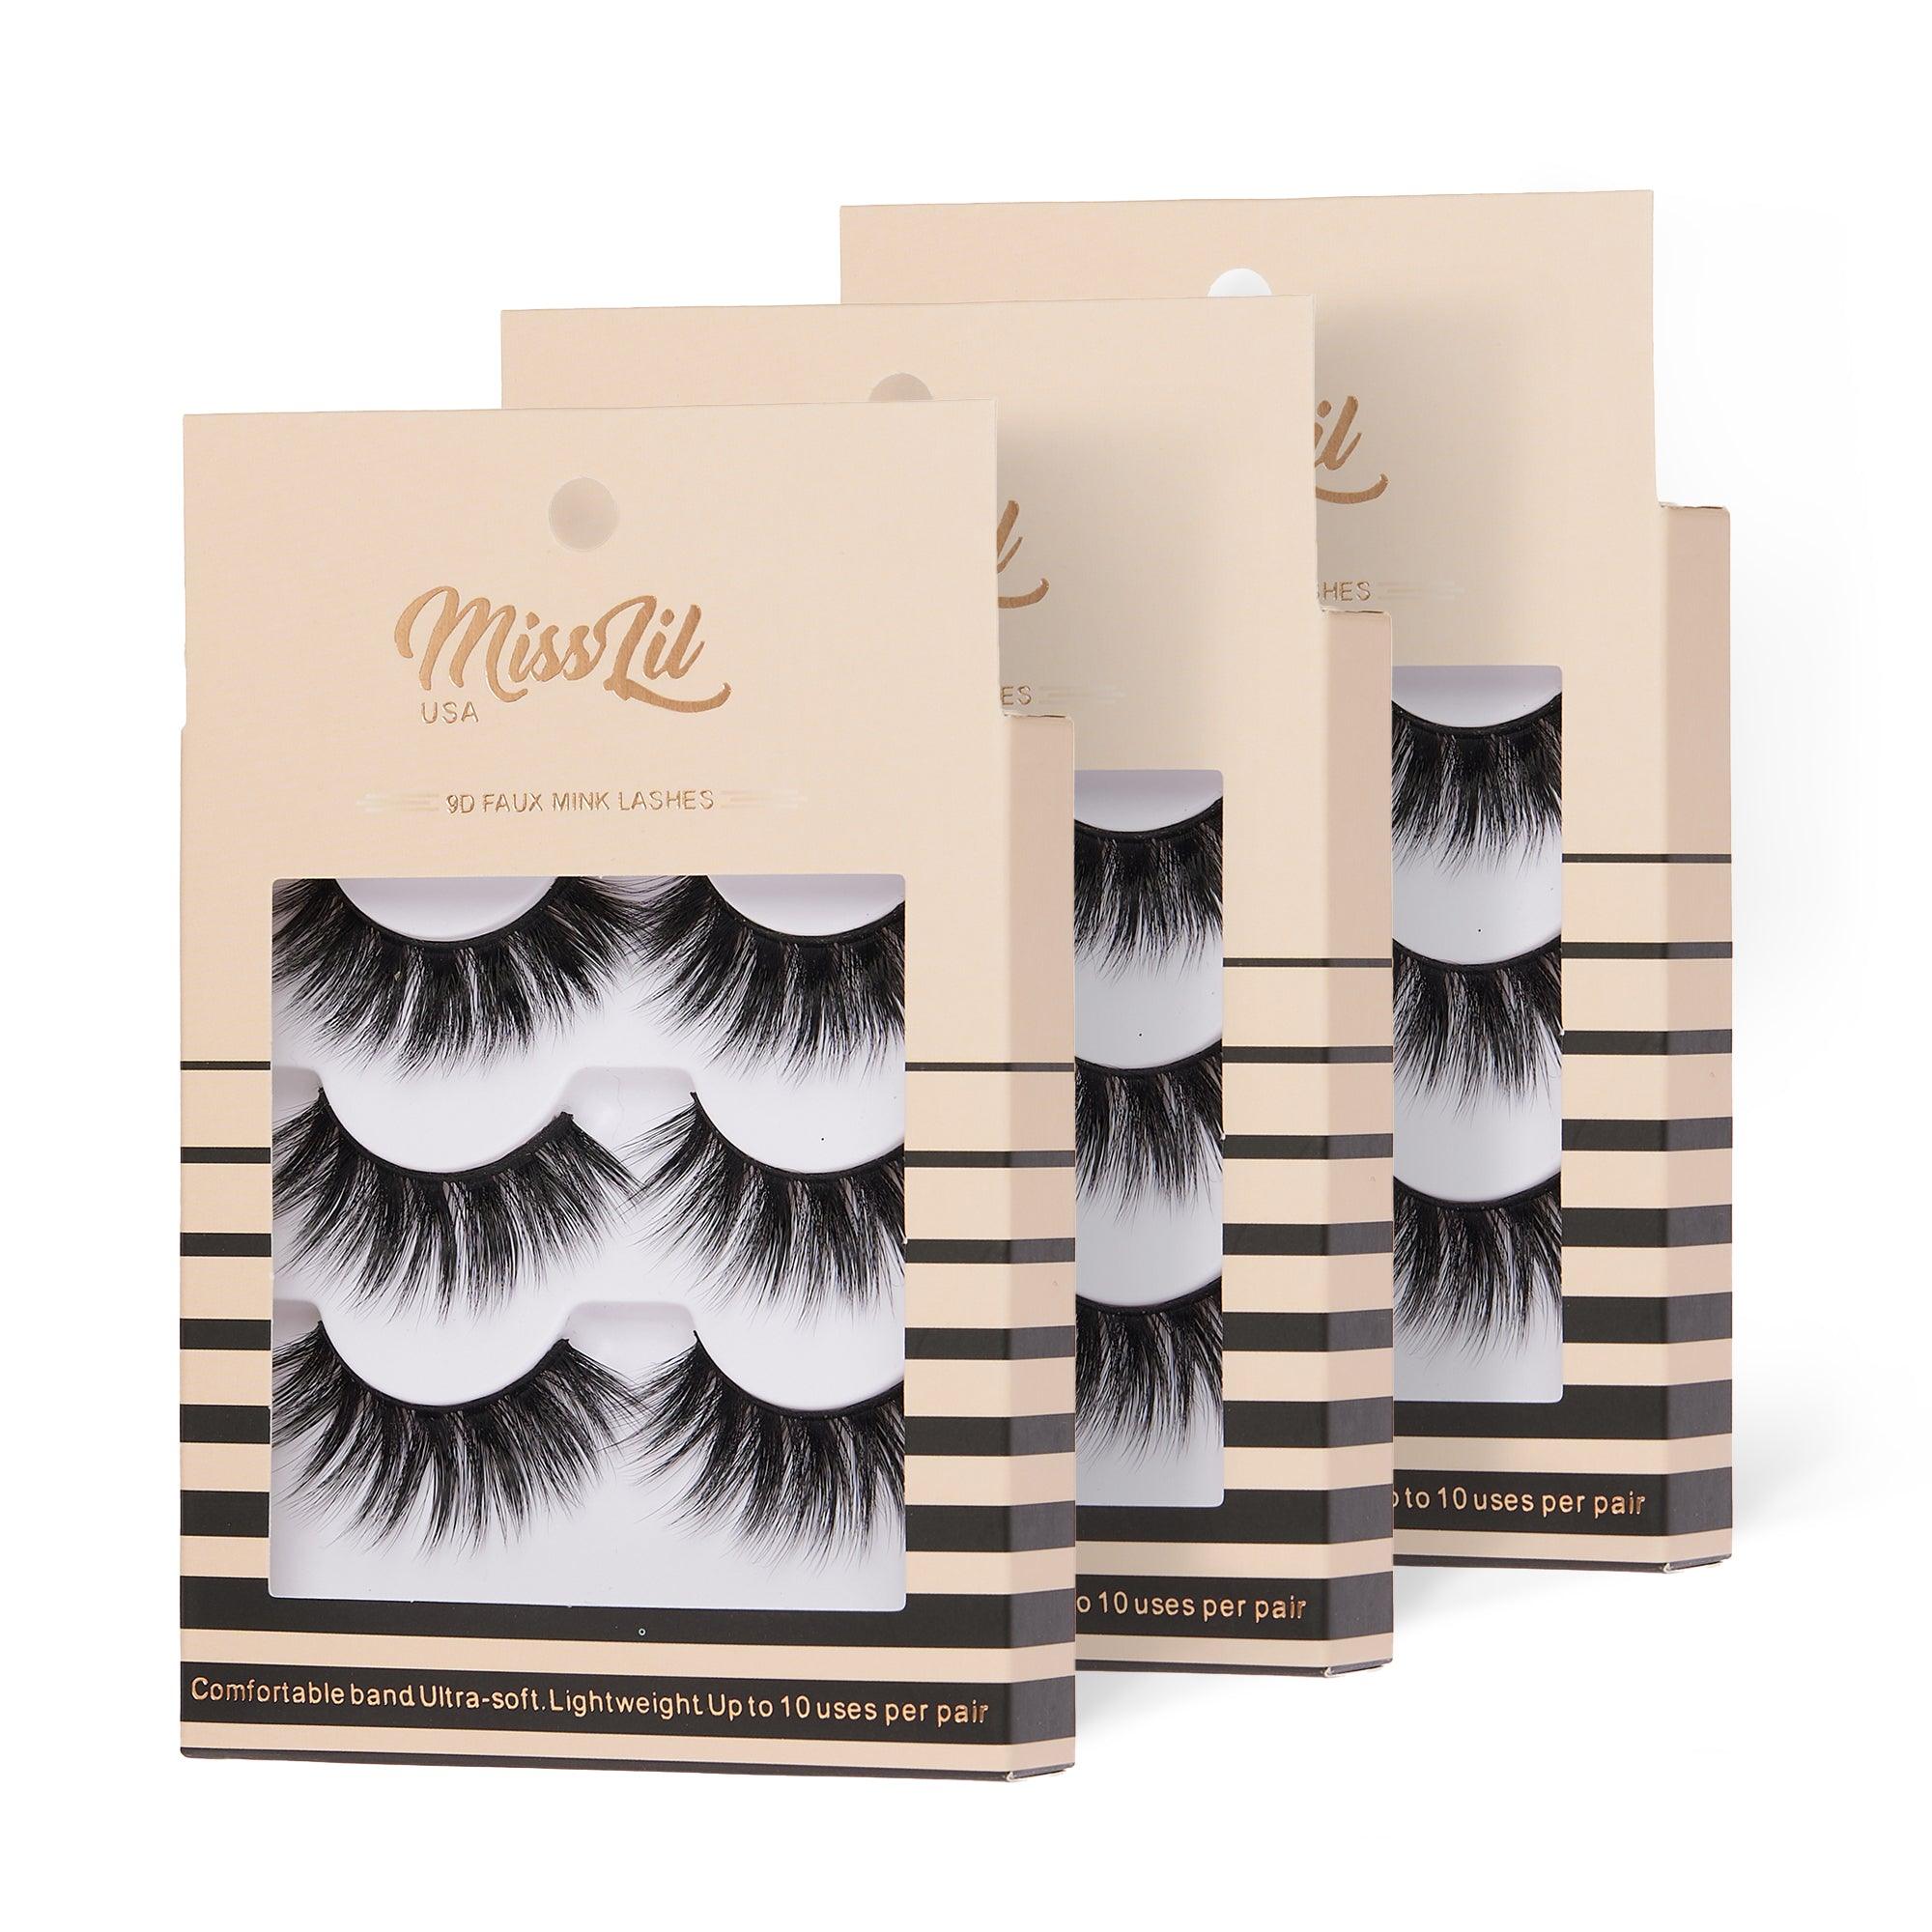 3-Pair Faux 9D Mink Eyelashes - Luxury Collection #15 - Pack of 3 - Miss Lil USA